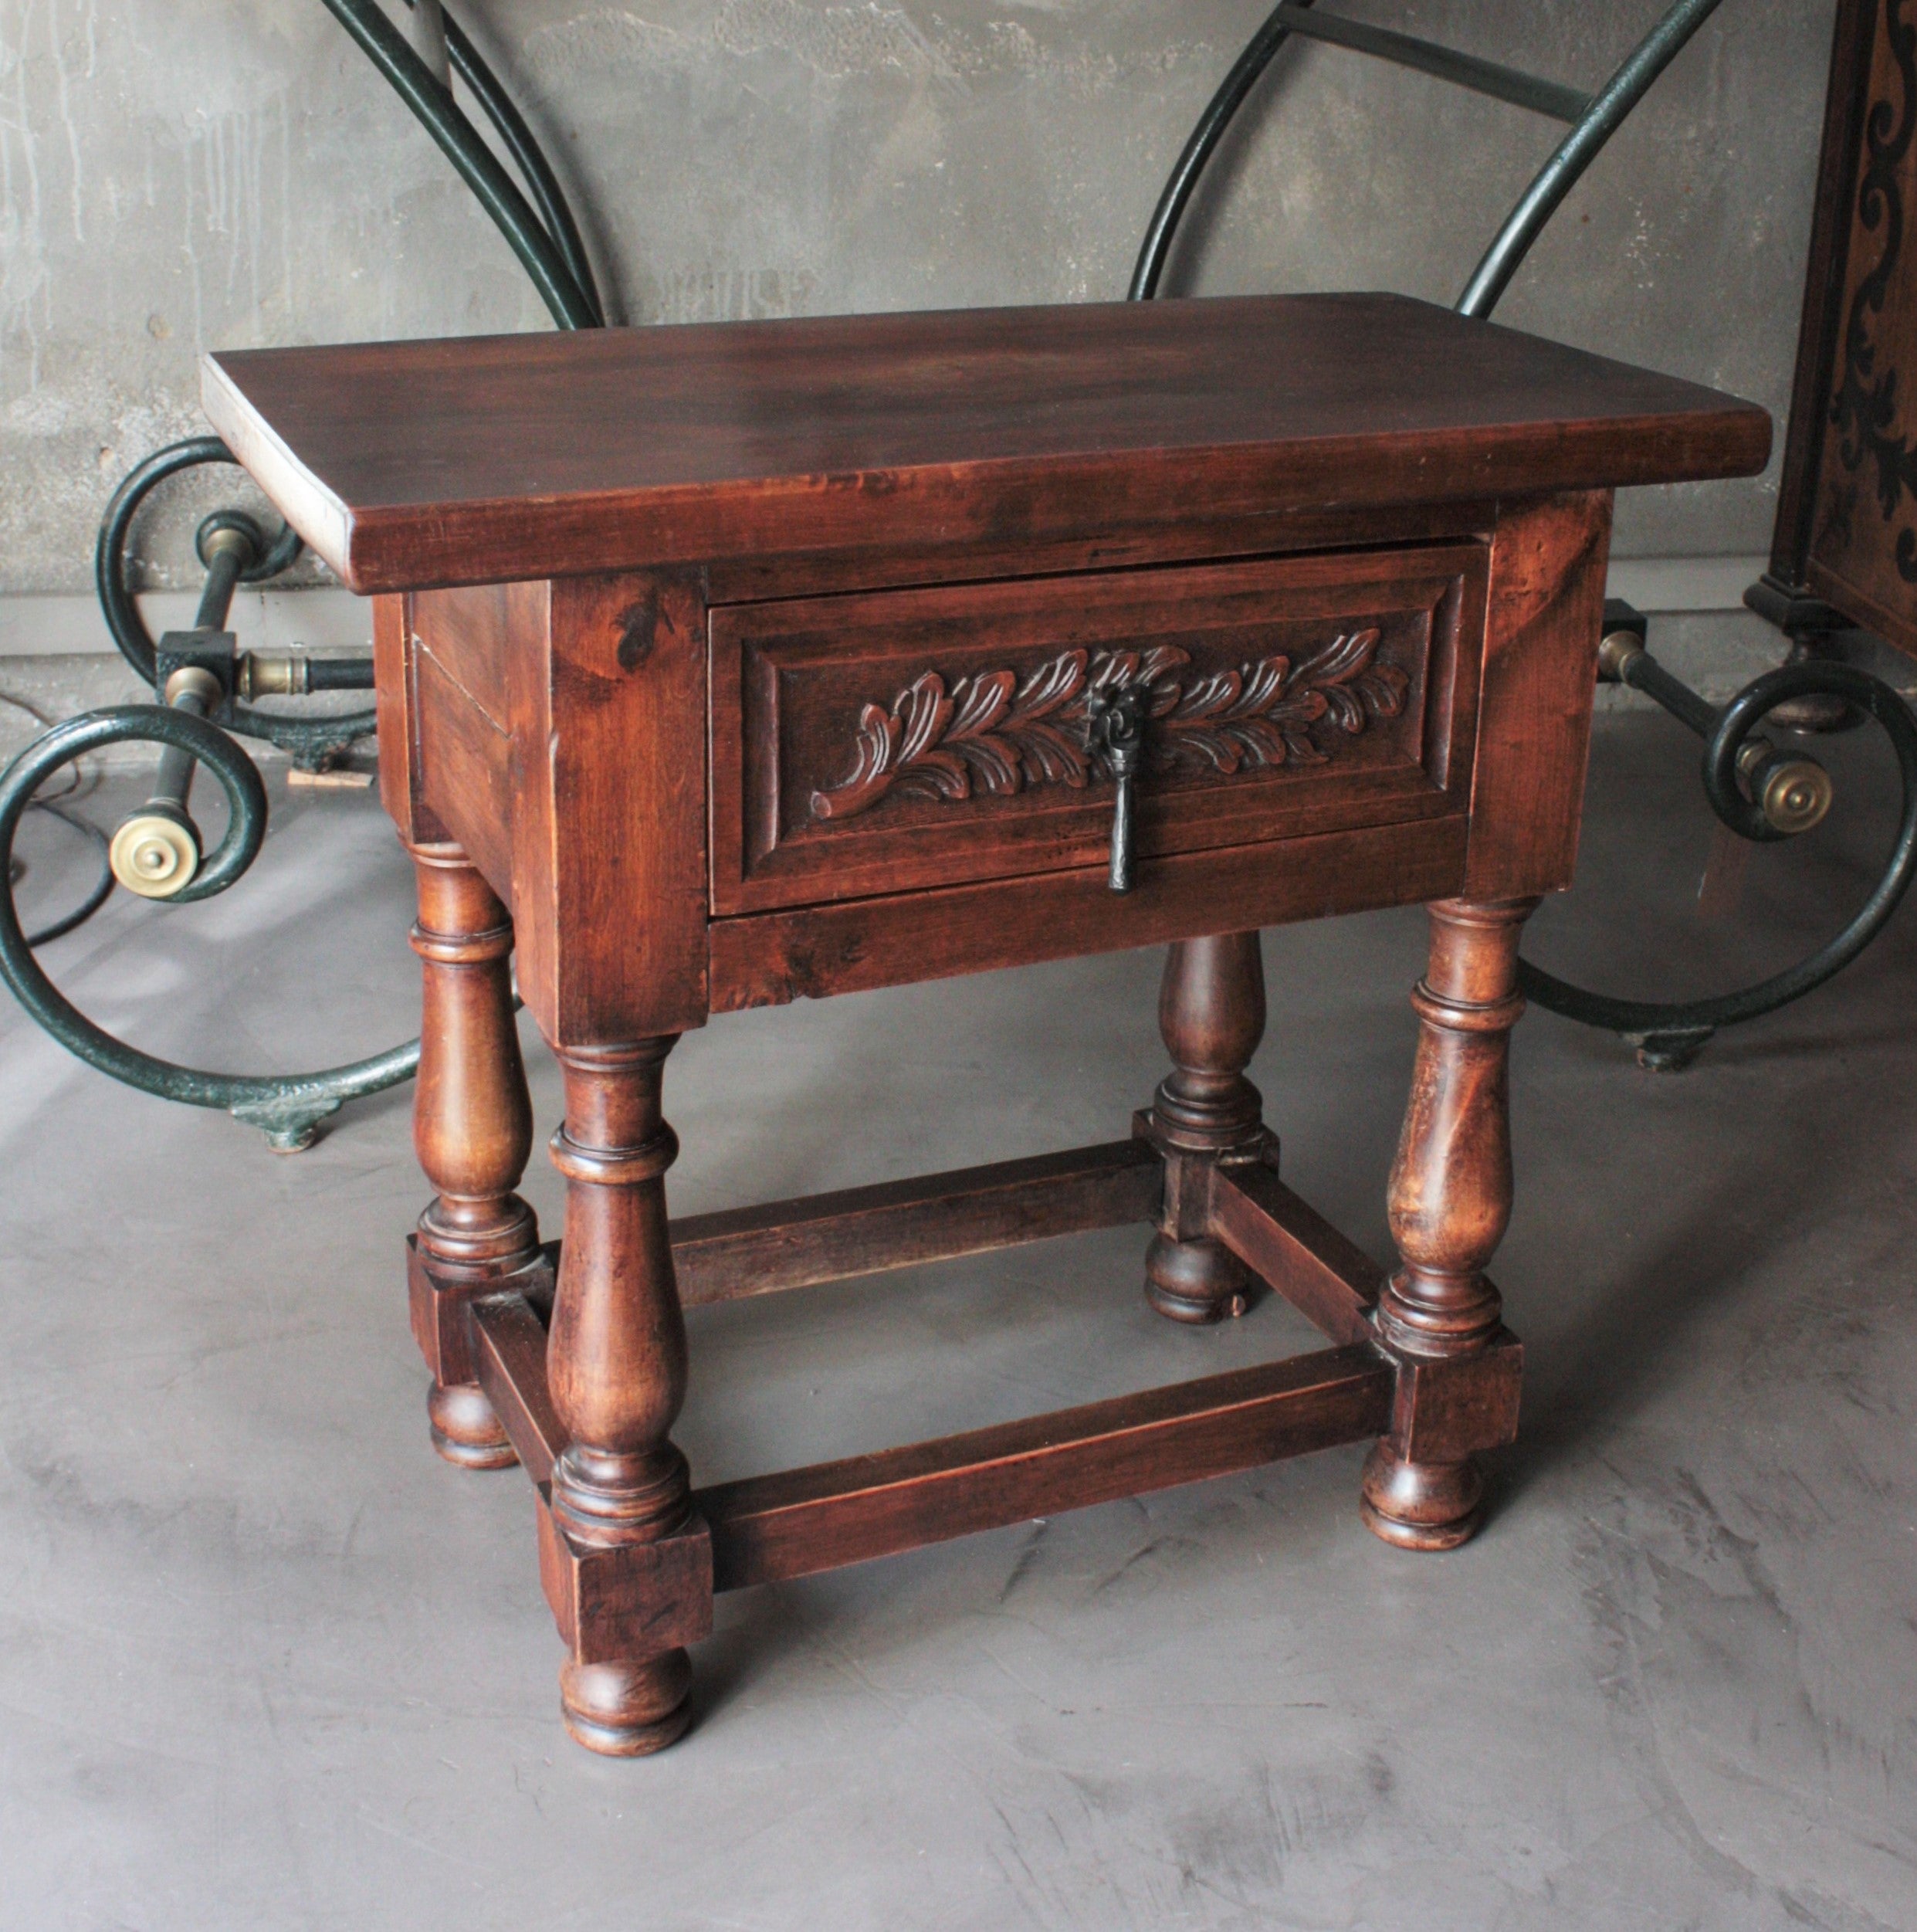 Spanish Walnut Side or End Table with Drawer and Iron Hardware
Walnut Spanish Revival side table with single carved drawer and iron hardware, Spain, 1930s.
This elegant Spanish table features a simple, rectangular top, sitting above a single drawer